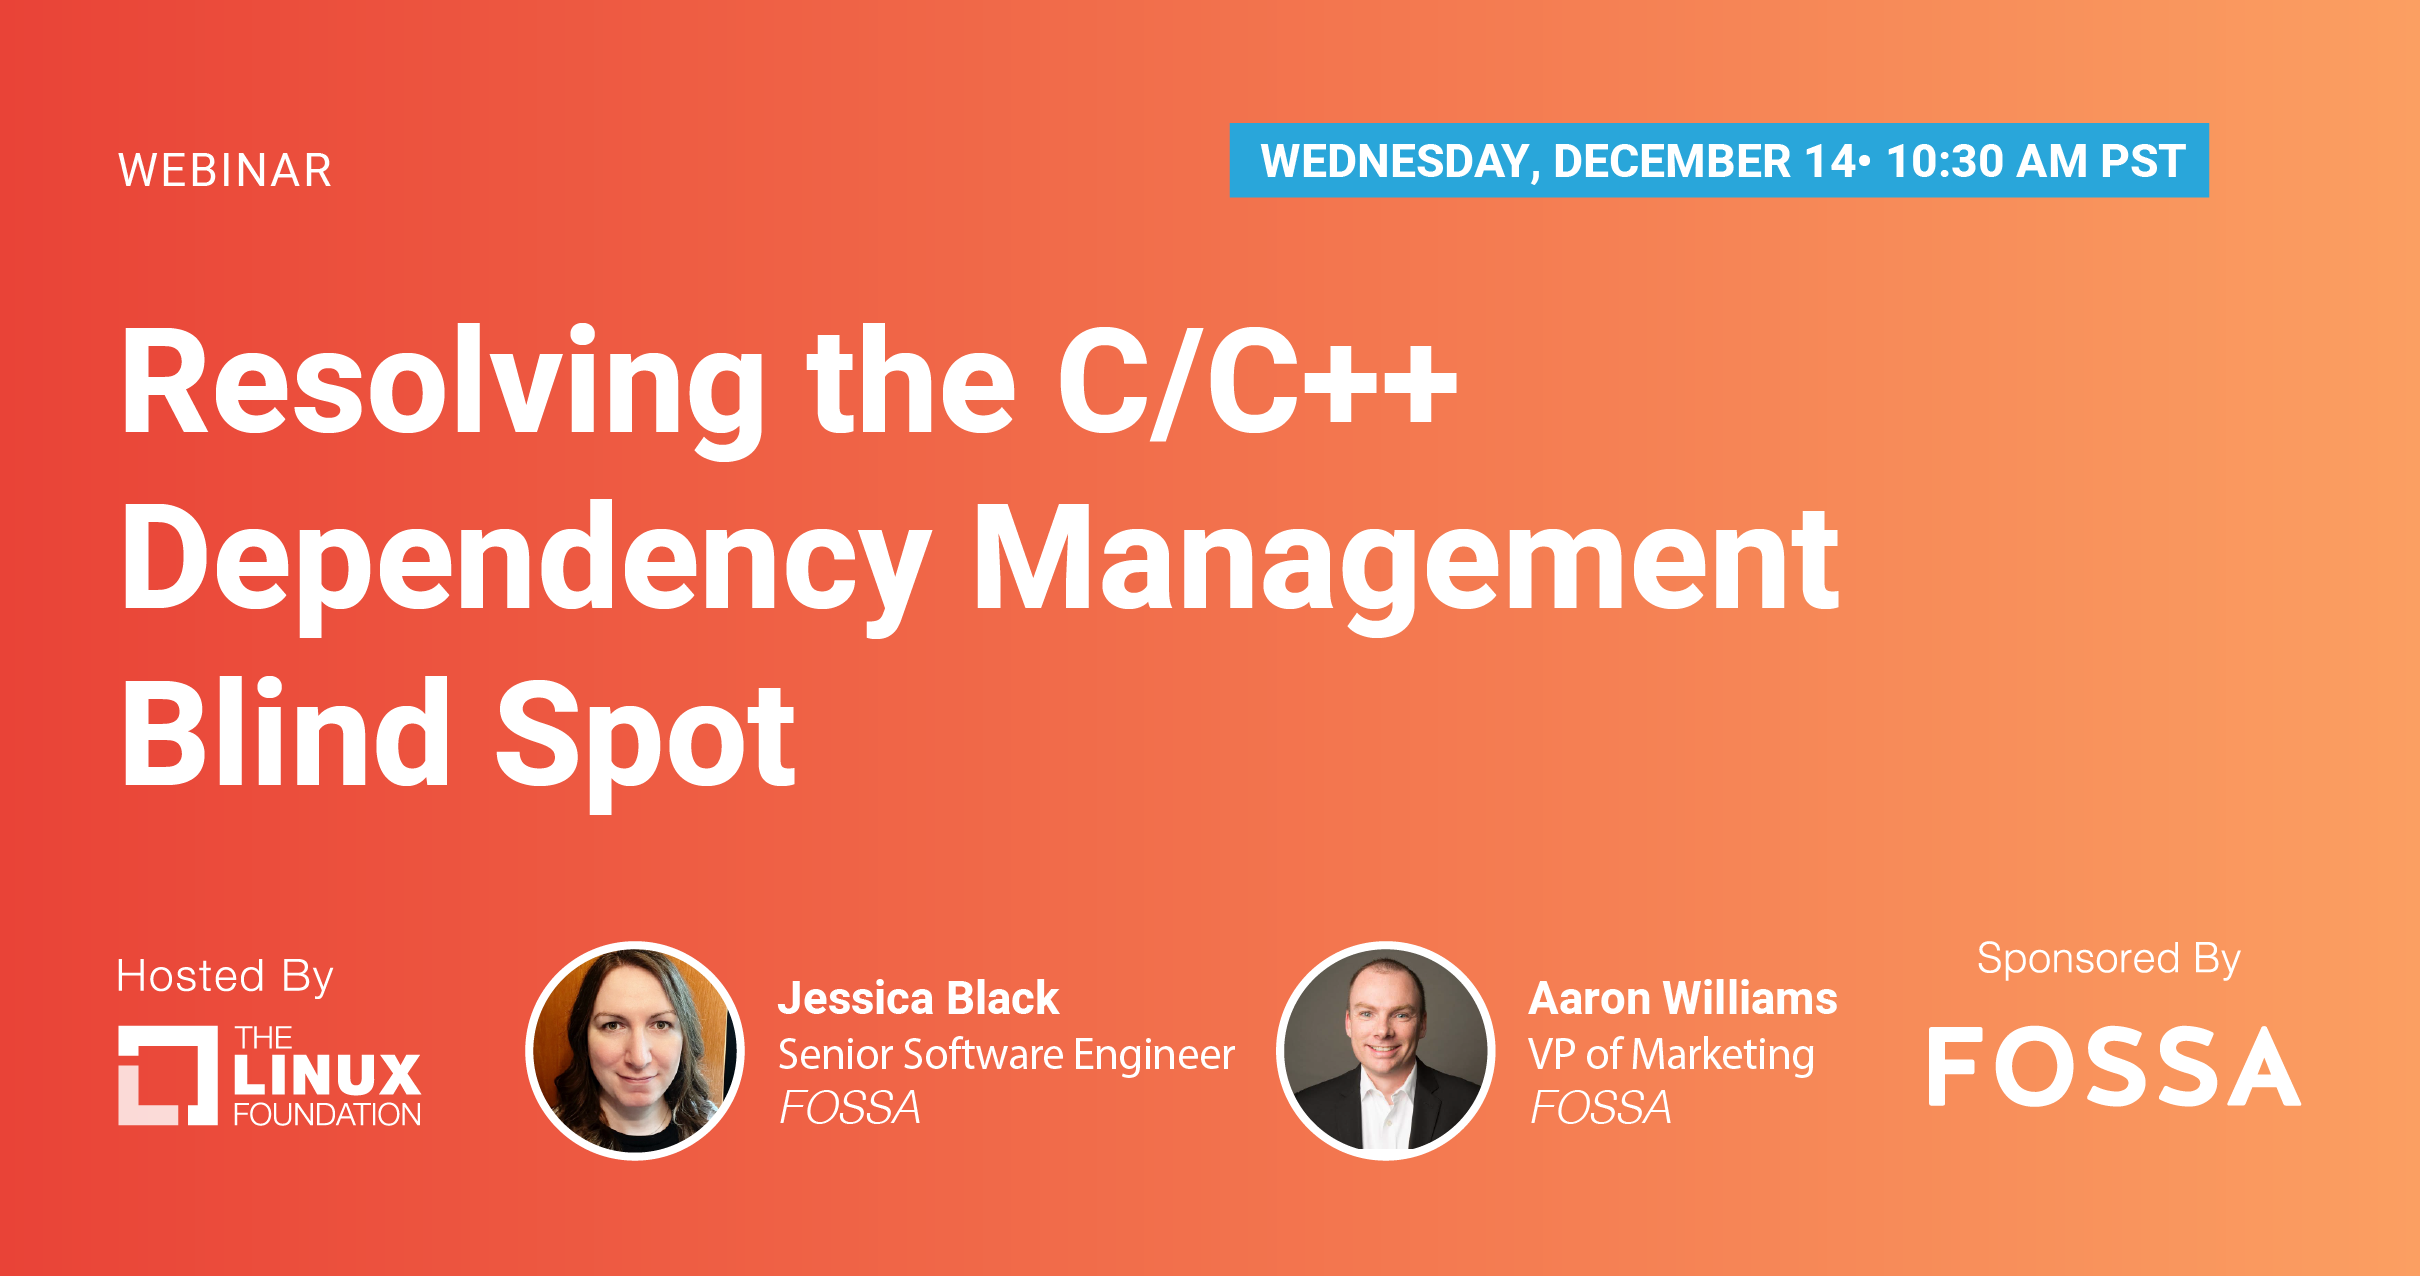 Resolving the C/C++ Dependency Management Blind Spot featured image